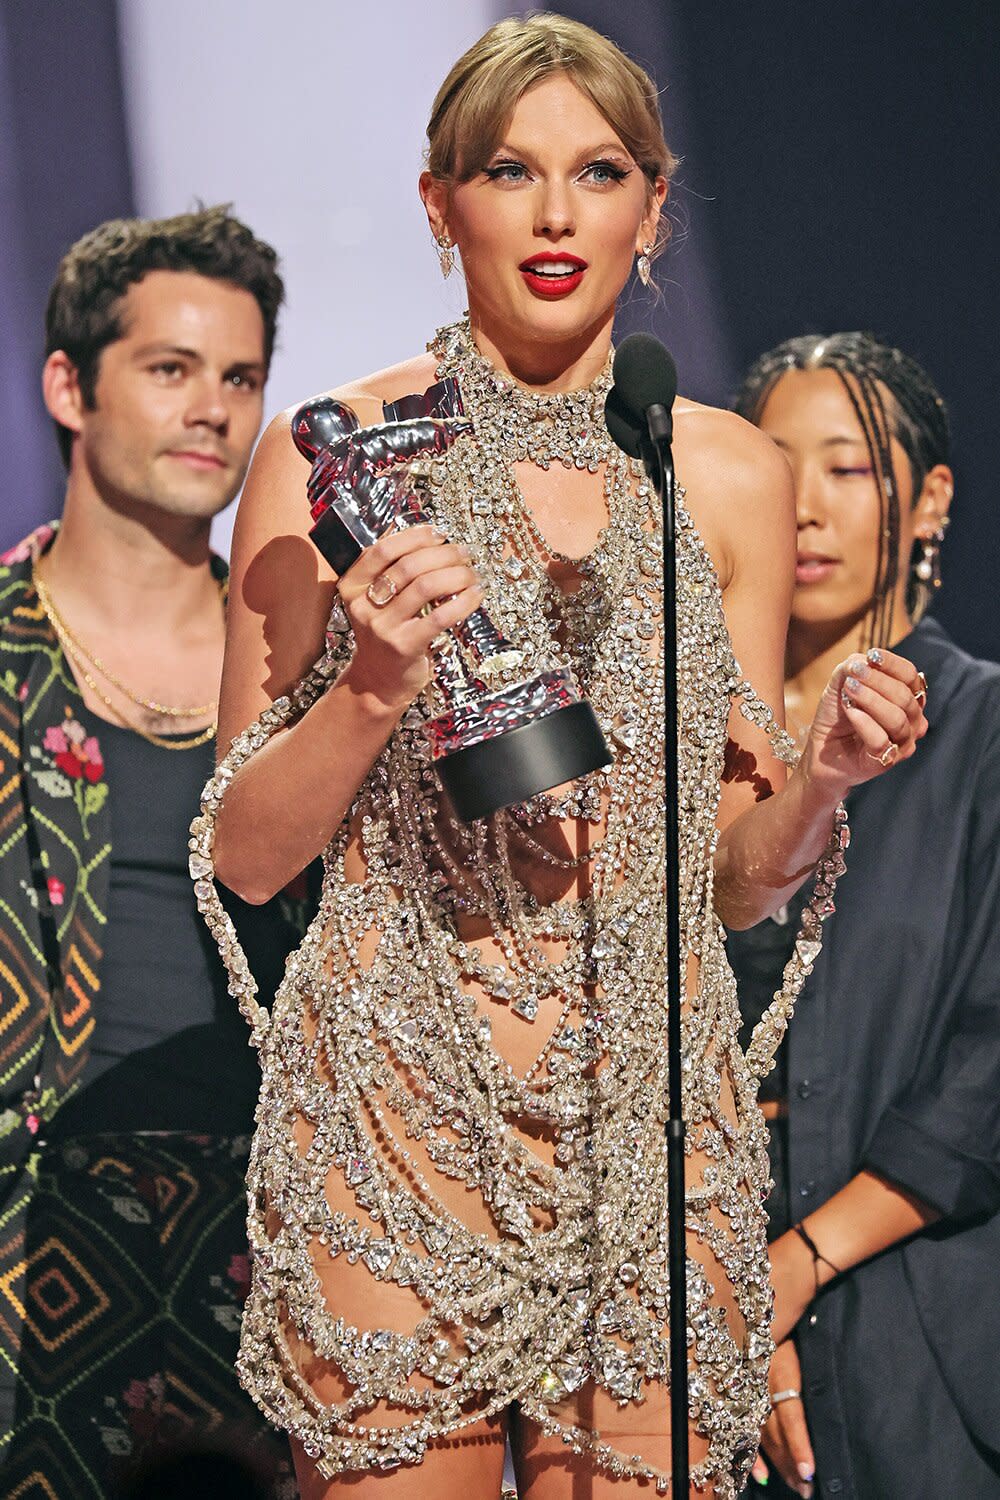 Taylor Swift Announces New Album After Winning Video of the Year at the